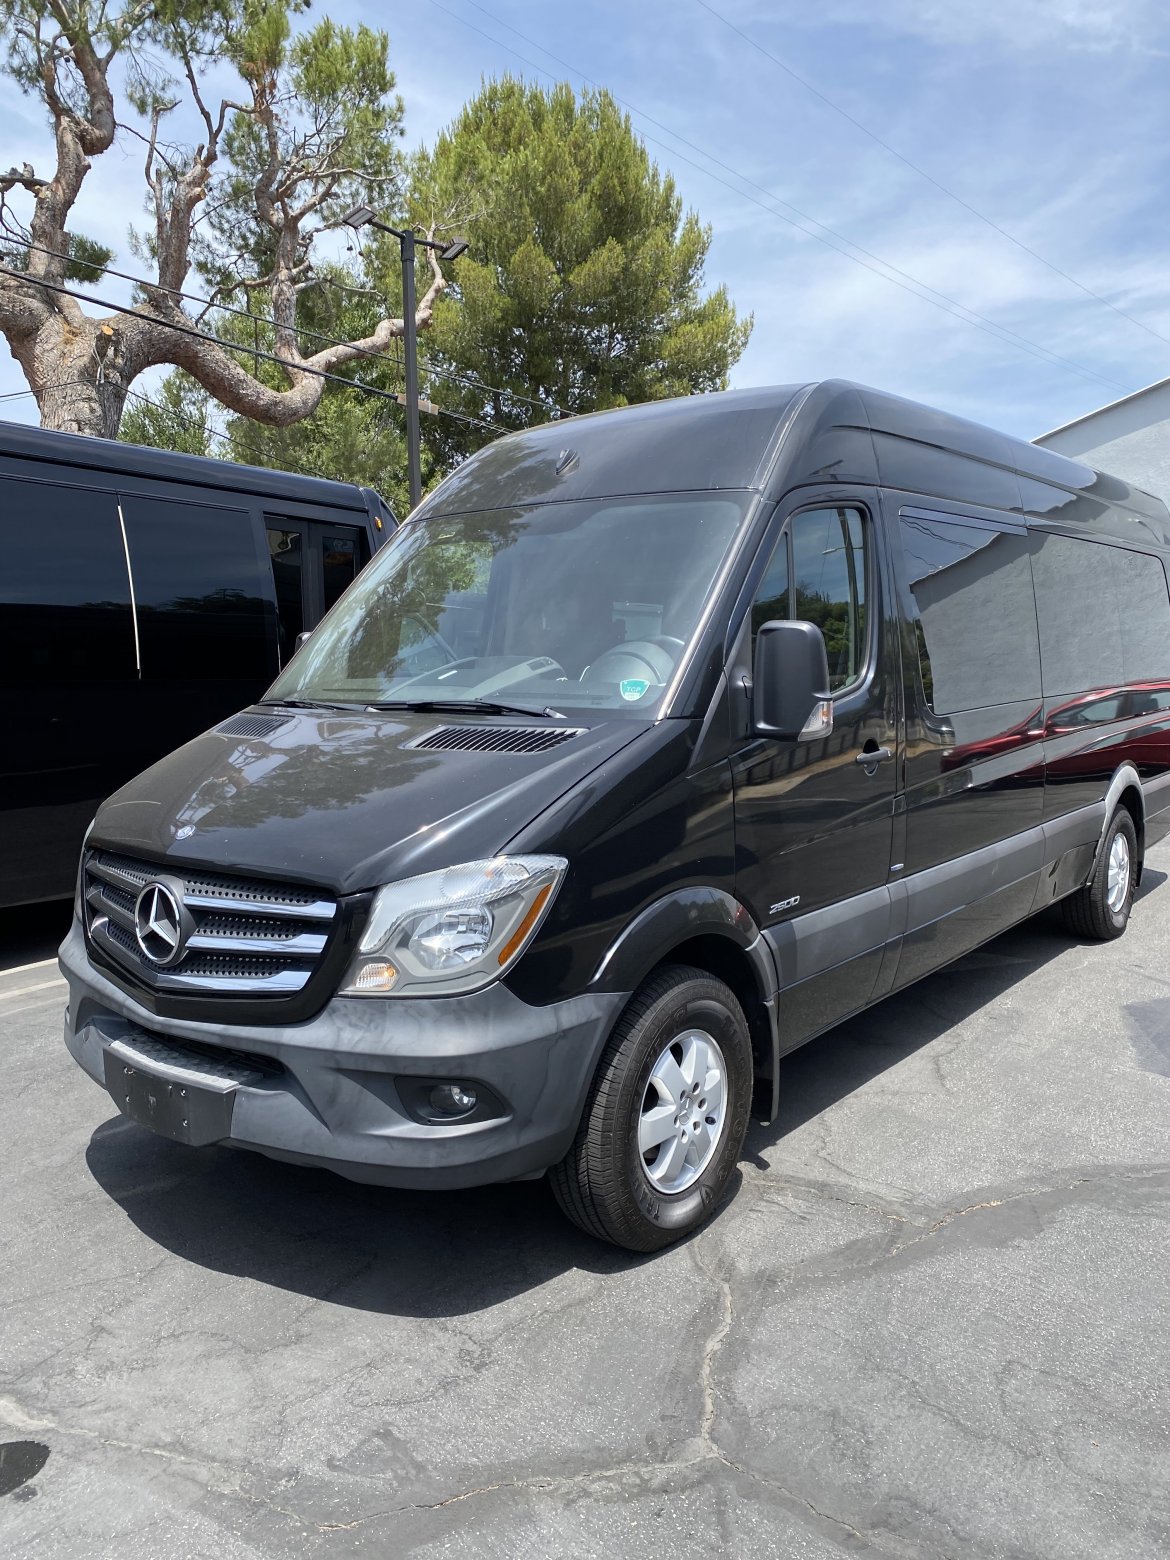 Executive Shuttle for sale: 2015 Mercedes-Benz Sprinter 2500 170” EXT 170&quot; by Automotive Design and Fabrication